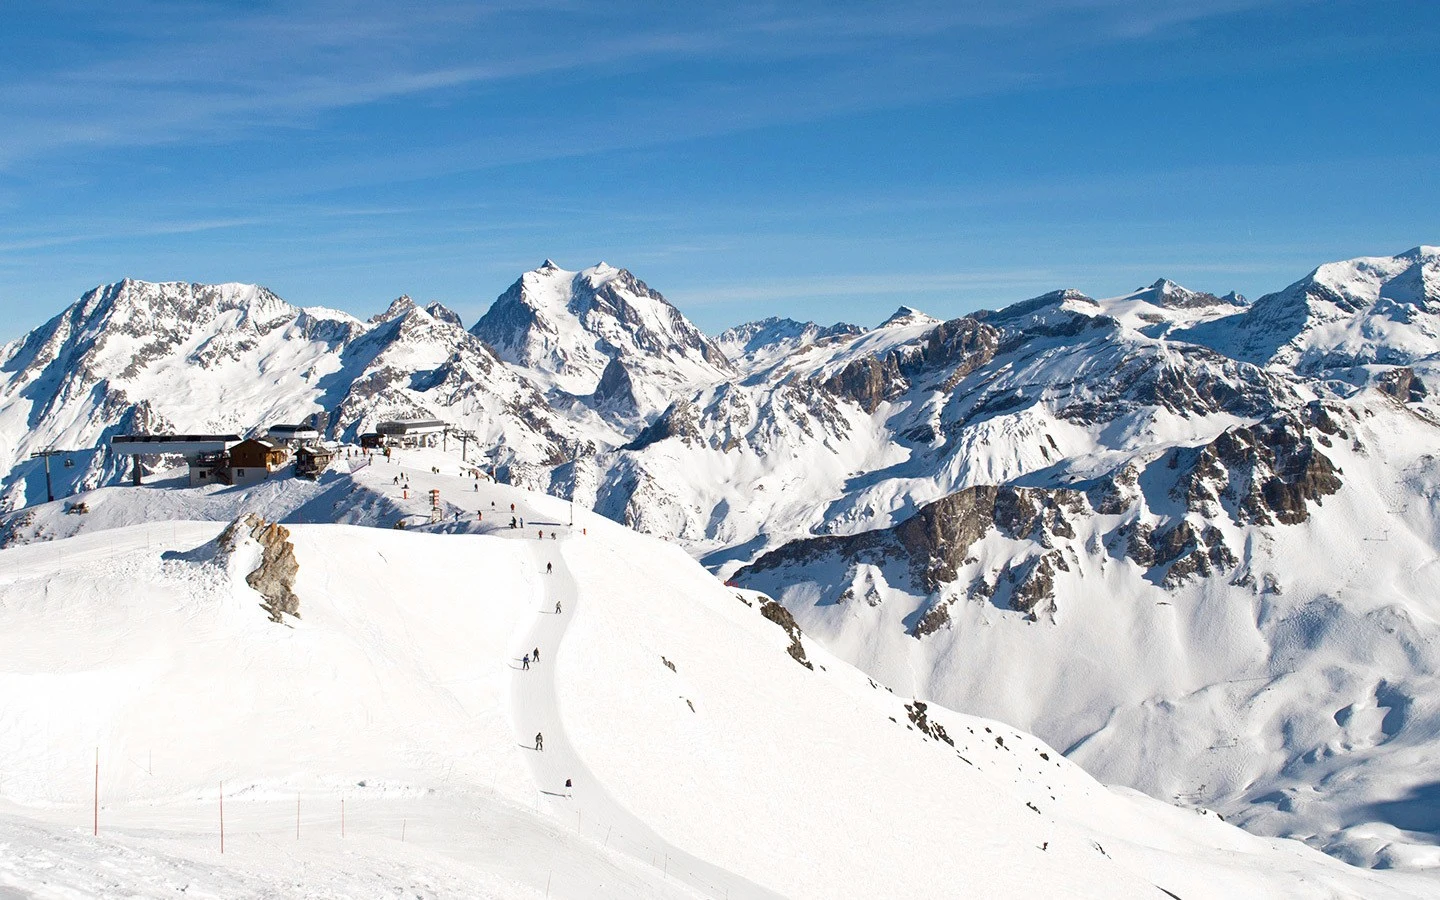 The first-timer’s guide to skiing